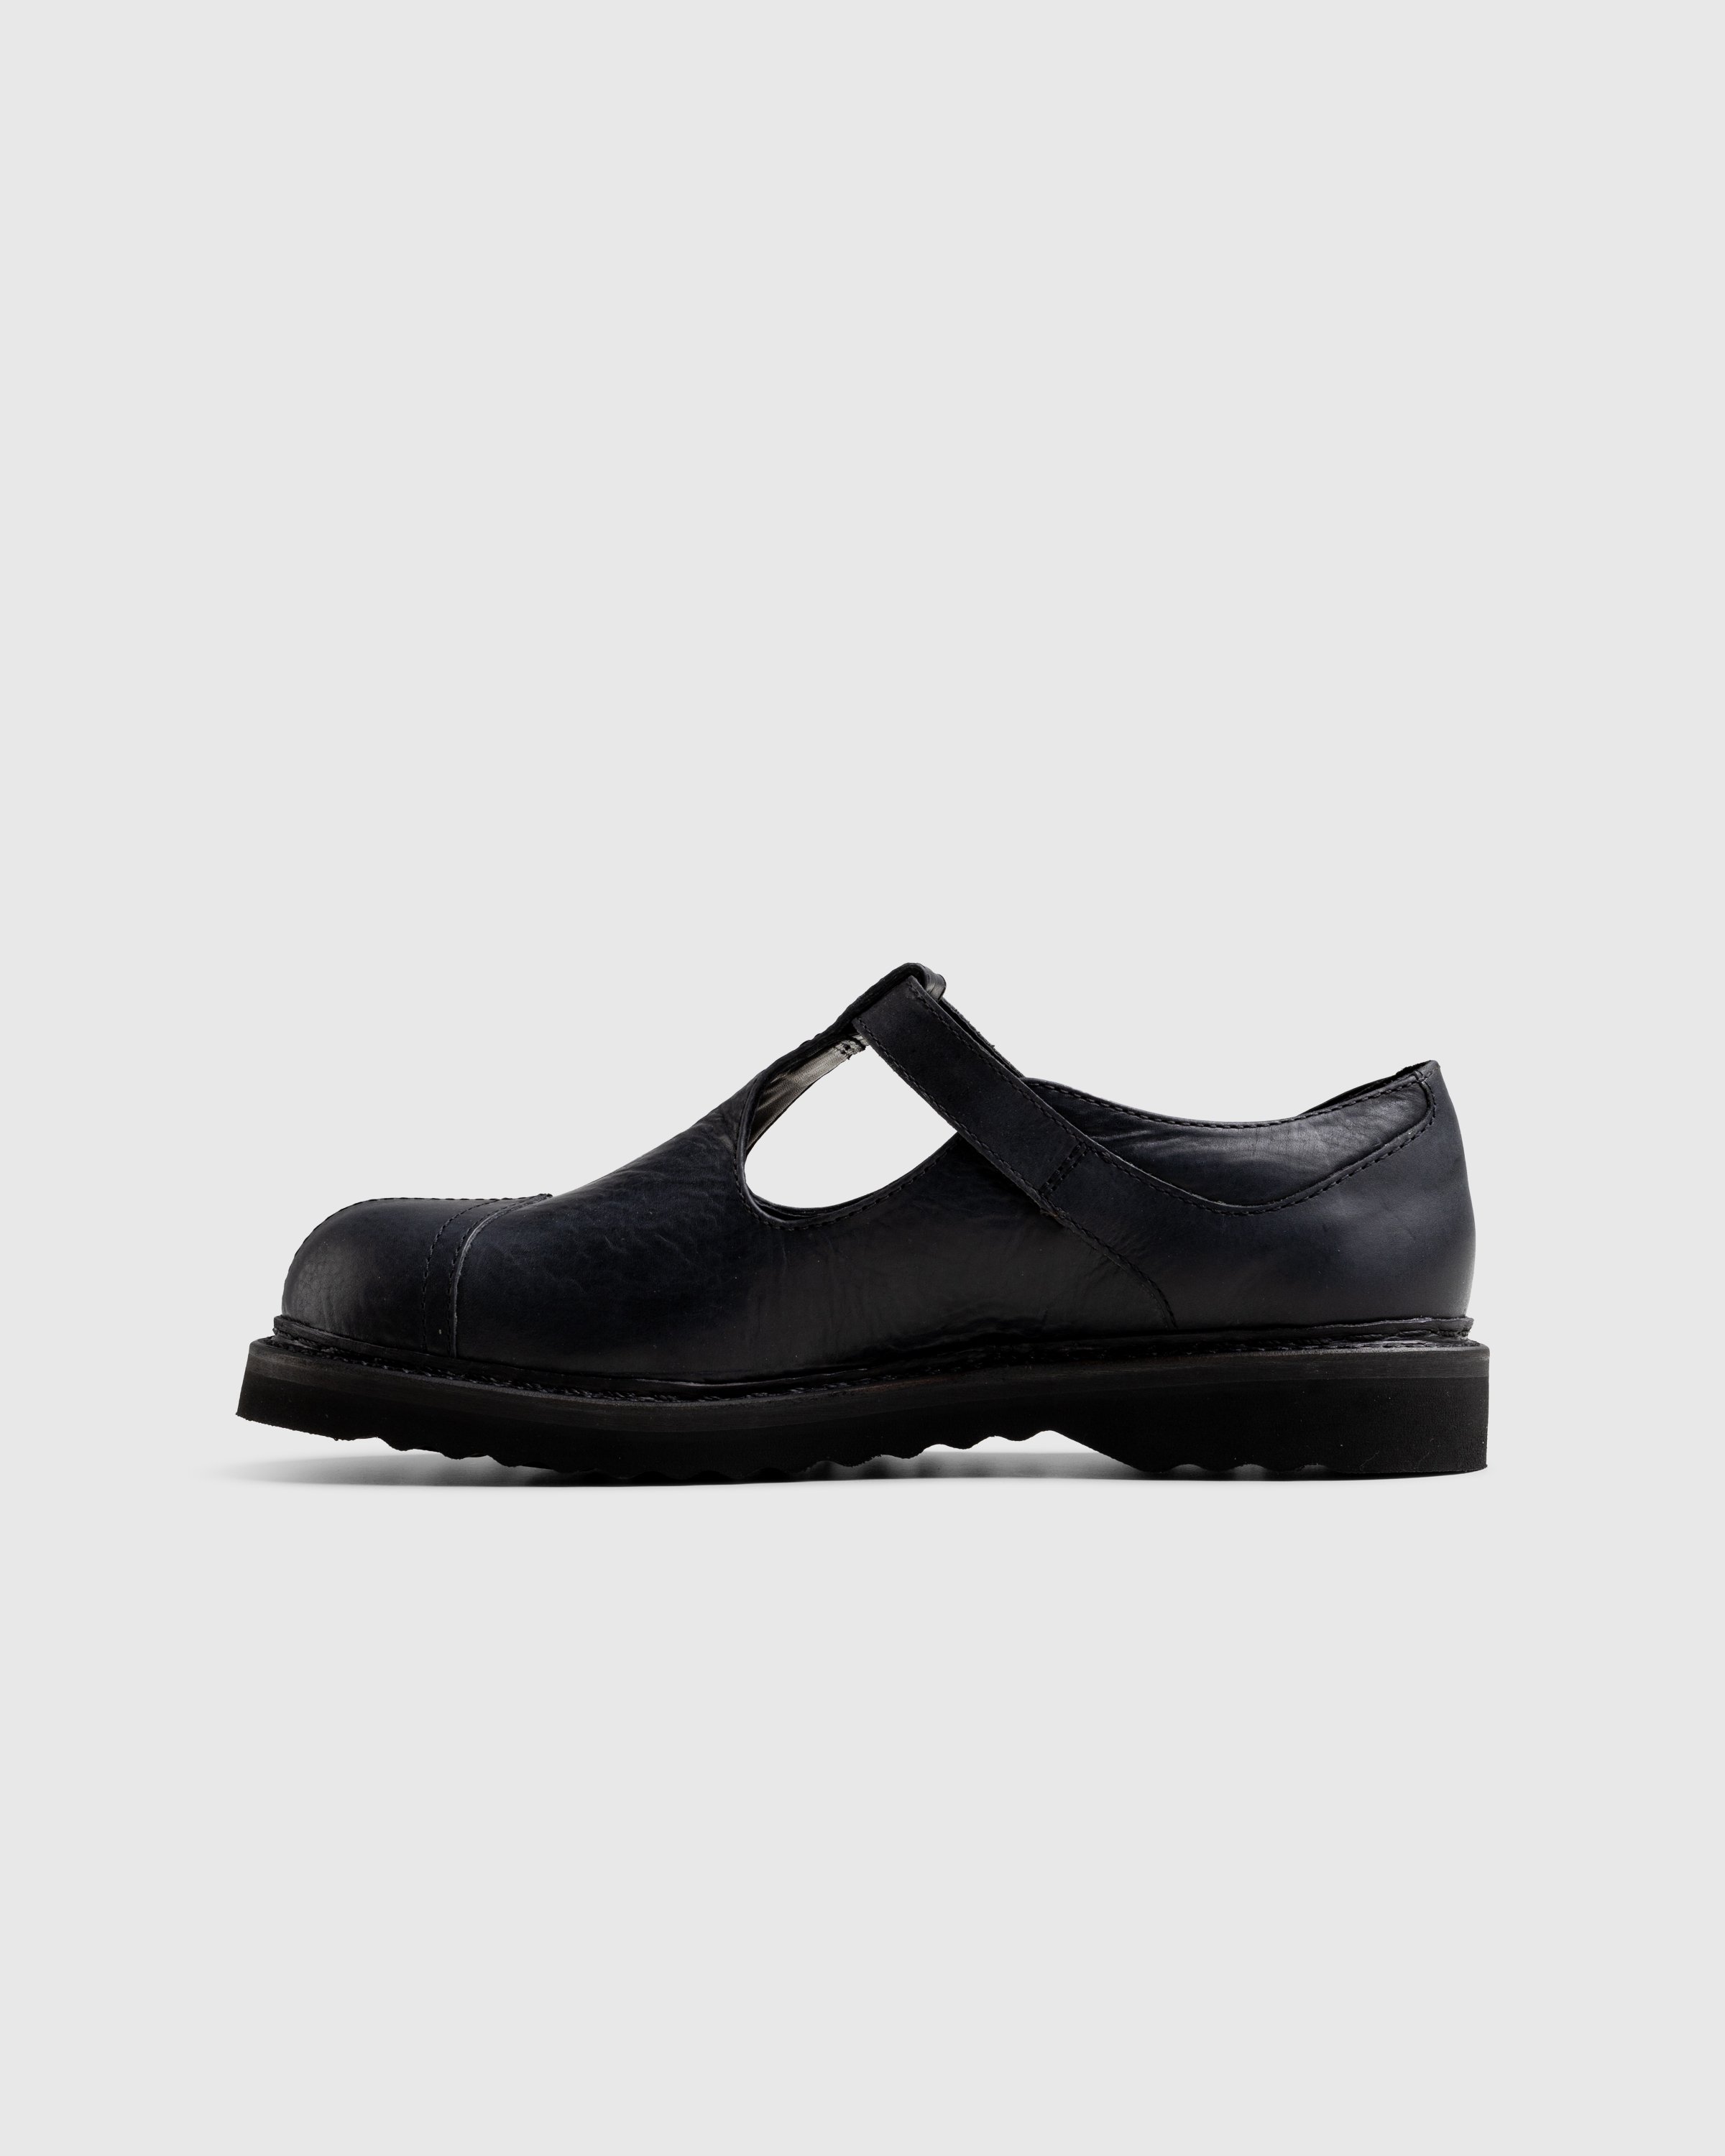 Our Legacy - Camden Shoe Car Tire Black Leather - Footwear - Black - Image 2